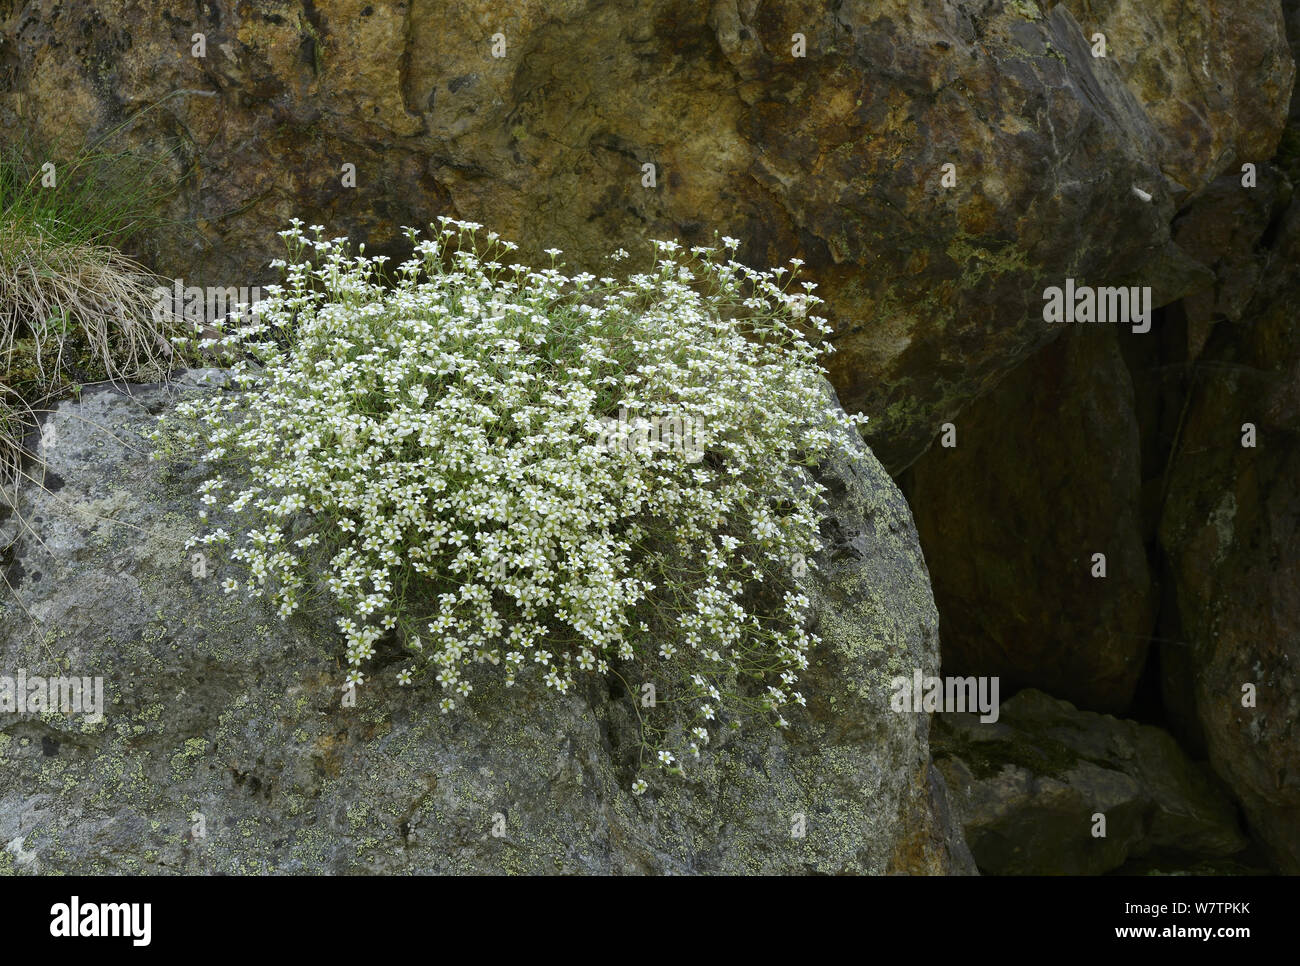 Willkomm's saxifrage (Saxifraga willkommiana) in flower growing on rock, near Gedre, Pyrenees National Park, France, June. Stock Photo